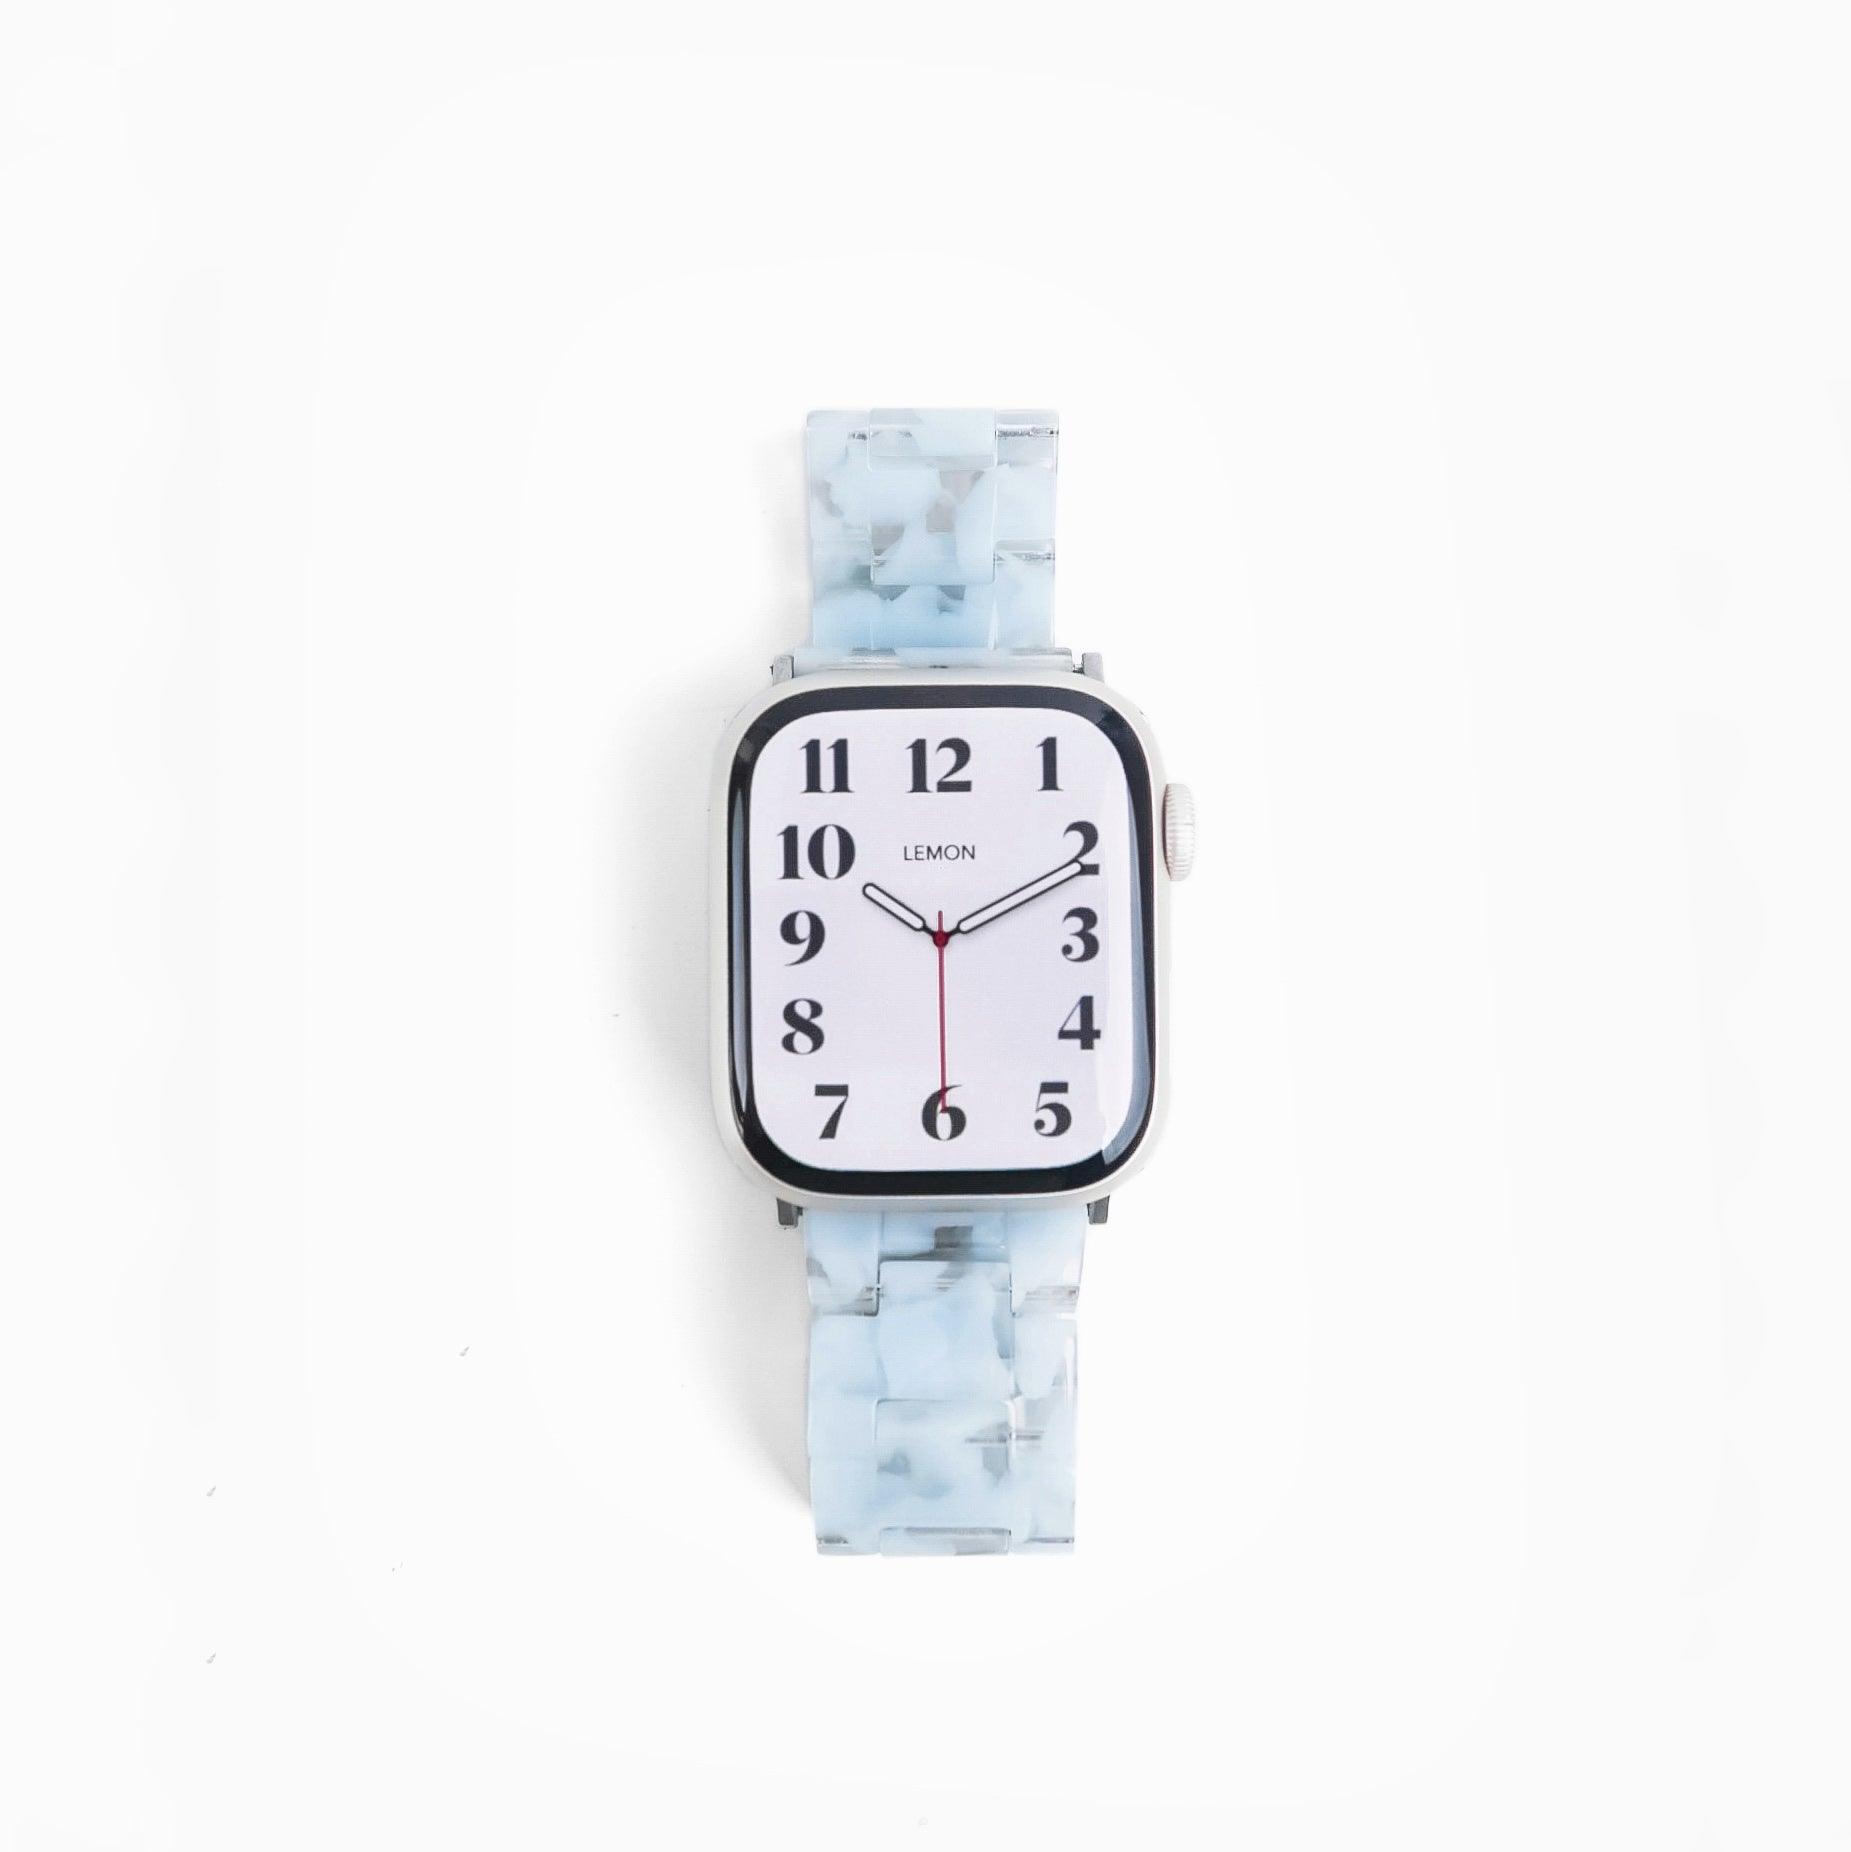 Polly Resin Apple Watch Band - Baby Blue